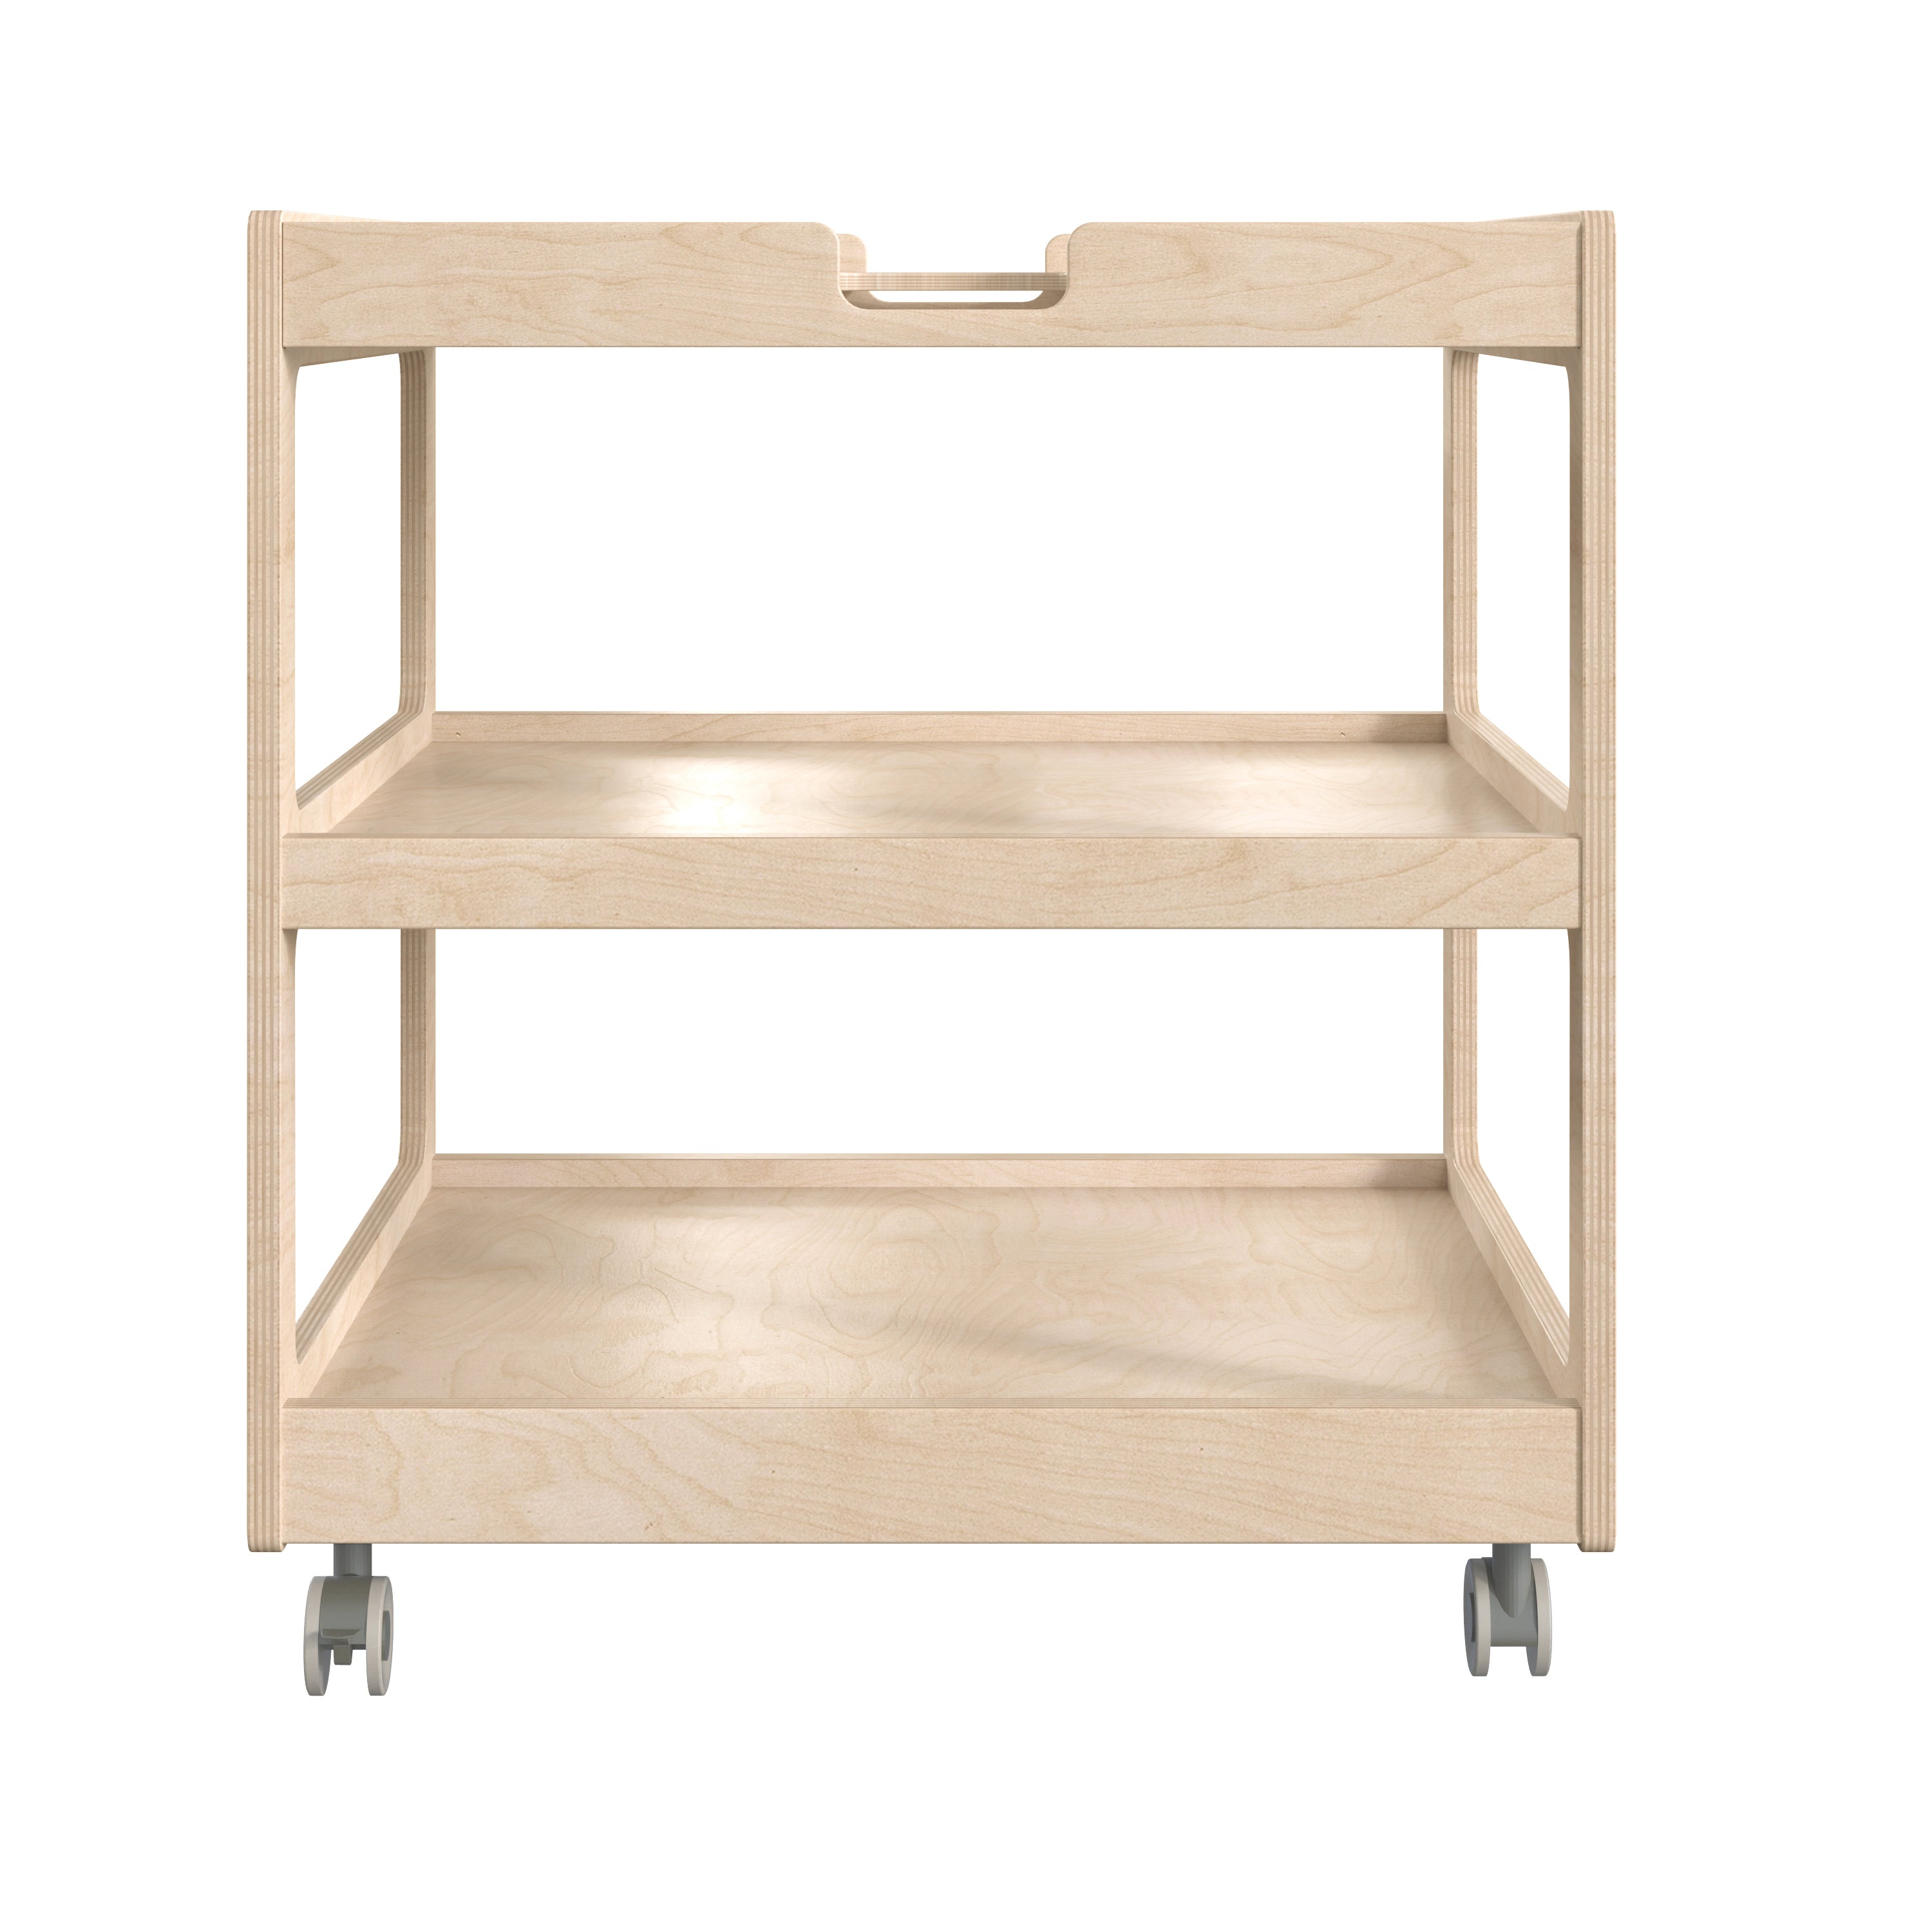 Bright Beginnings Commercial Grade Square Space Saving Wooden Mobile Classroom Storage Cart, Locking Caster Wheels, Kid Friendly Design-en Classroom Storage Carts-Flash Furniture-Wall2Wall Furnishings